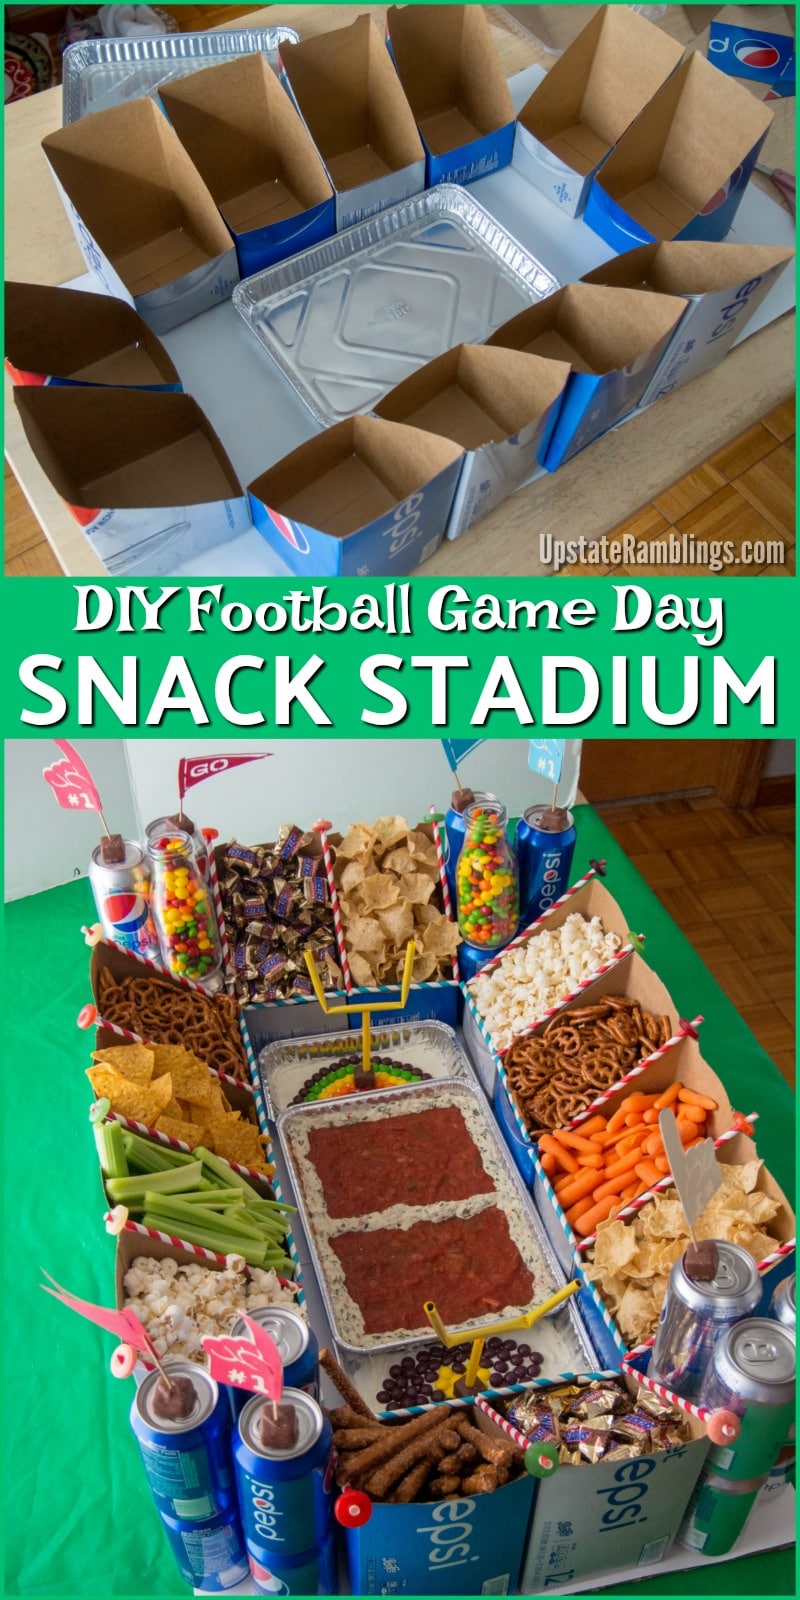 Ultimate in sports party entertaining - check out this Football Snack Stadium made with Soda Cartons! The easy DIY Modular Snack Stadium is perfect for your Football Game Day Party. Check out this tutorial and make your Big Game party one that will be remembered for years! #ad #football #tailgate #snackstadium 